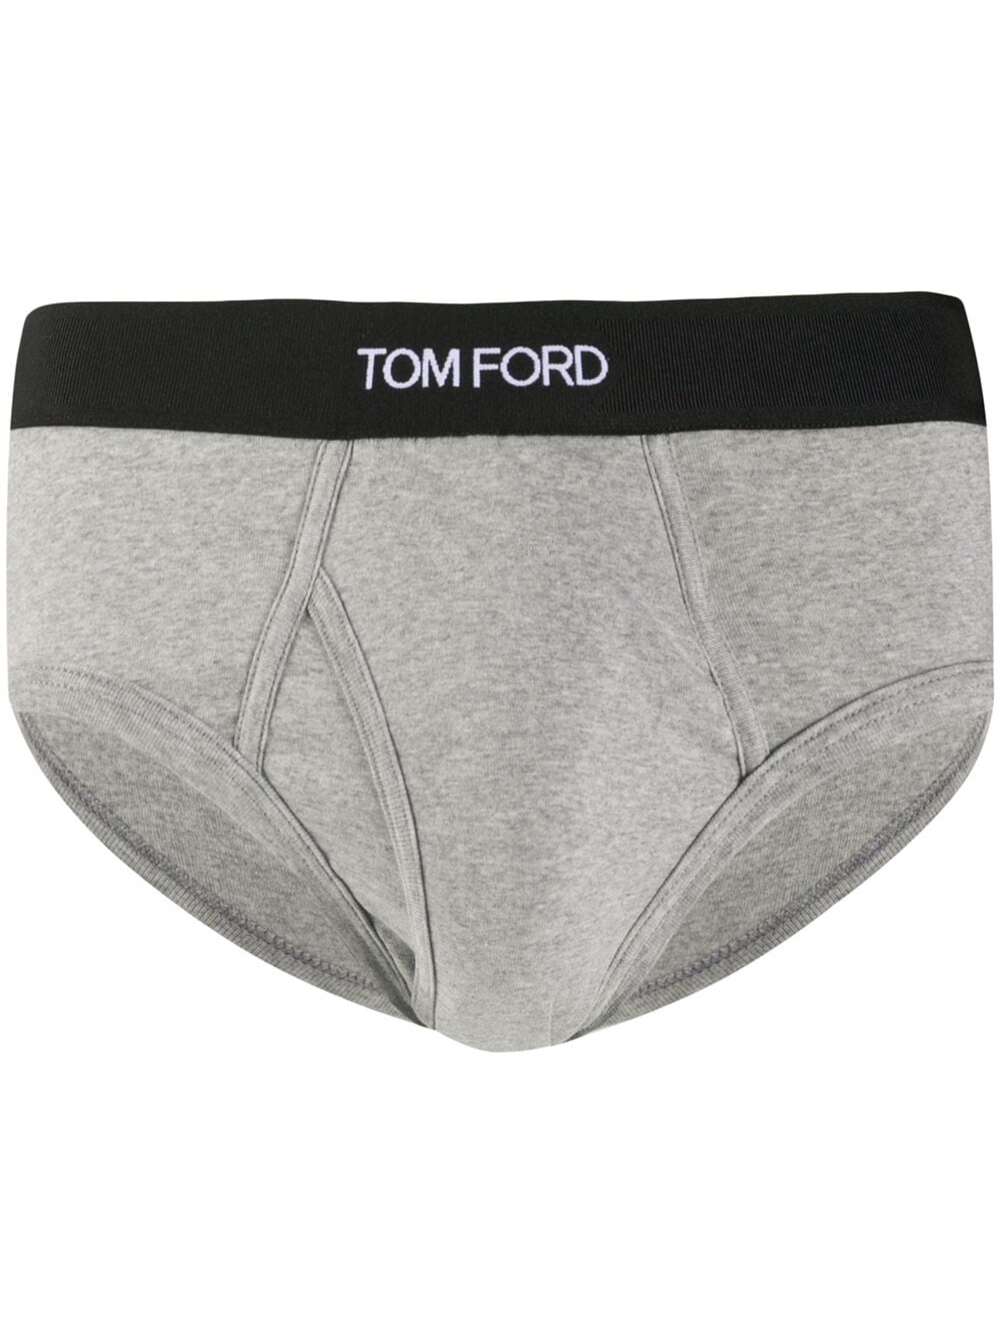 TOM FORD GREY BRIEFS WITH LOGGED WAISTBAND IN COTTON STRETCH MAN